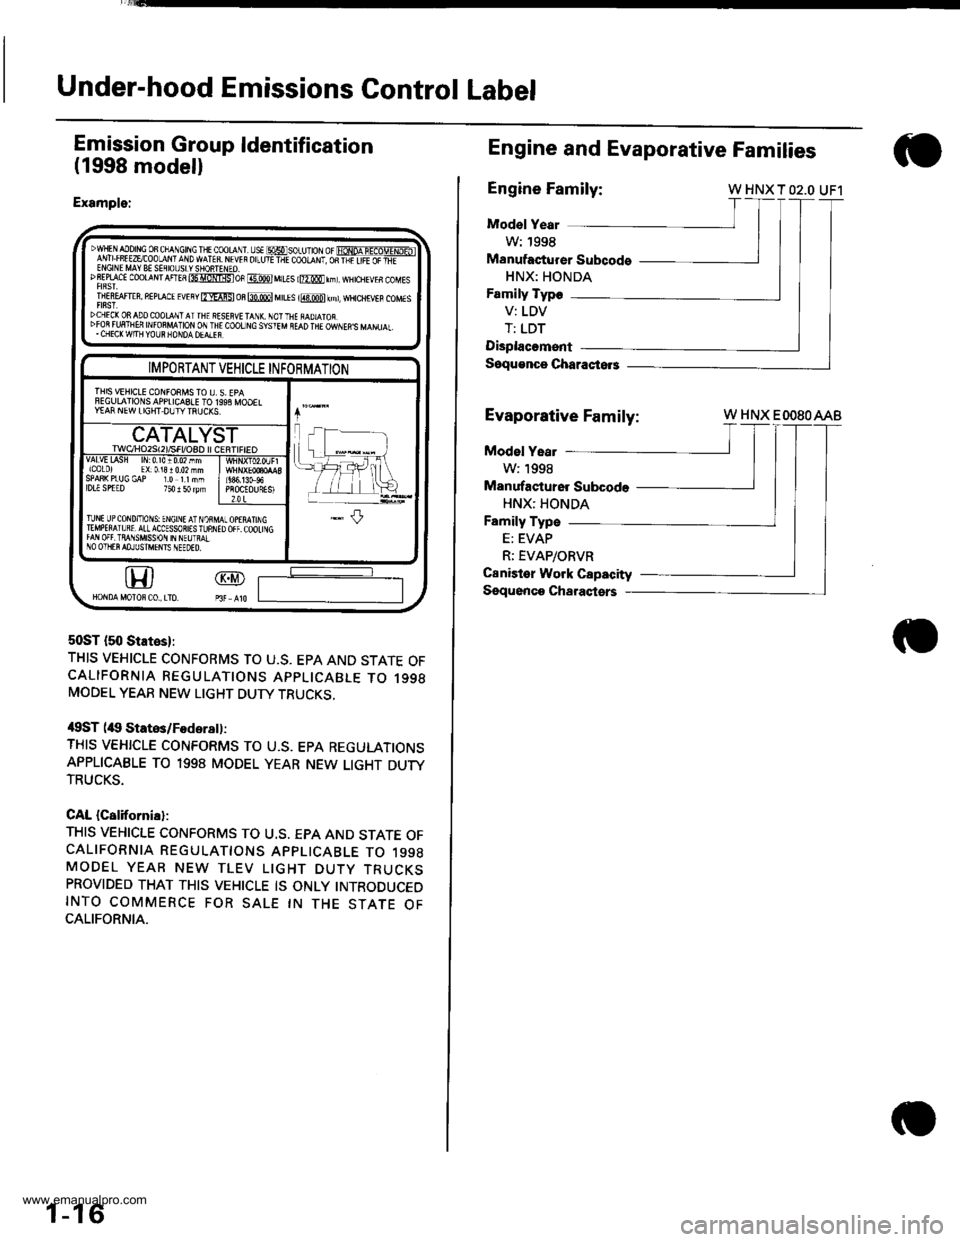 HONDA CR-V 1997 RD1-RD3 / 1.G User Guide 
Under-hood Emissions Control Label
Emission Group ldentification
(1998 modell
Example:
50ST {50 States}:
THIS VEHICLE CONFORMS TO U.S. EPA AND STATE OFCALIFORNIA REGULATIONS APPLICABLE TO 1998MODEL Y